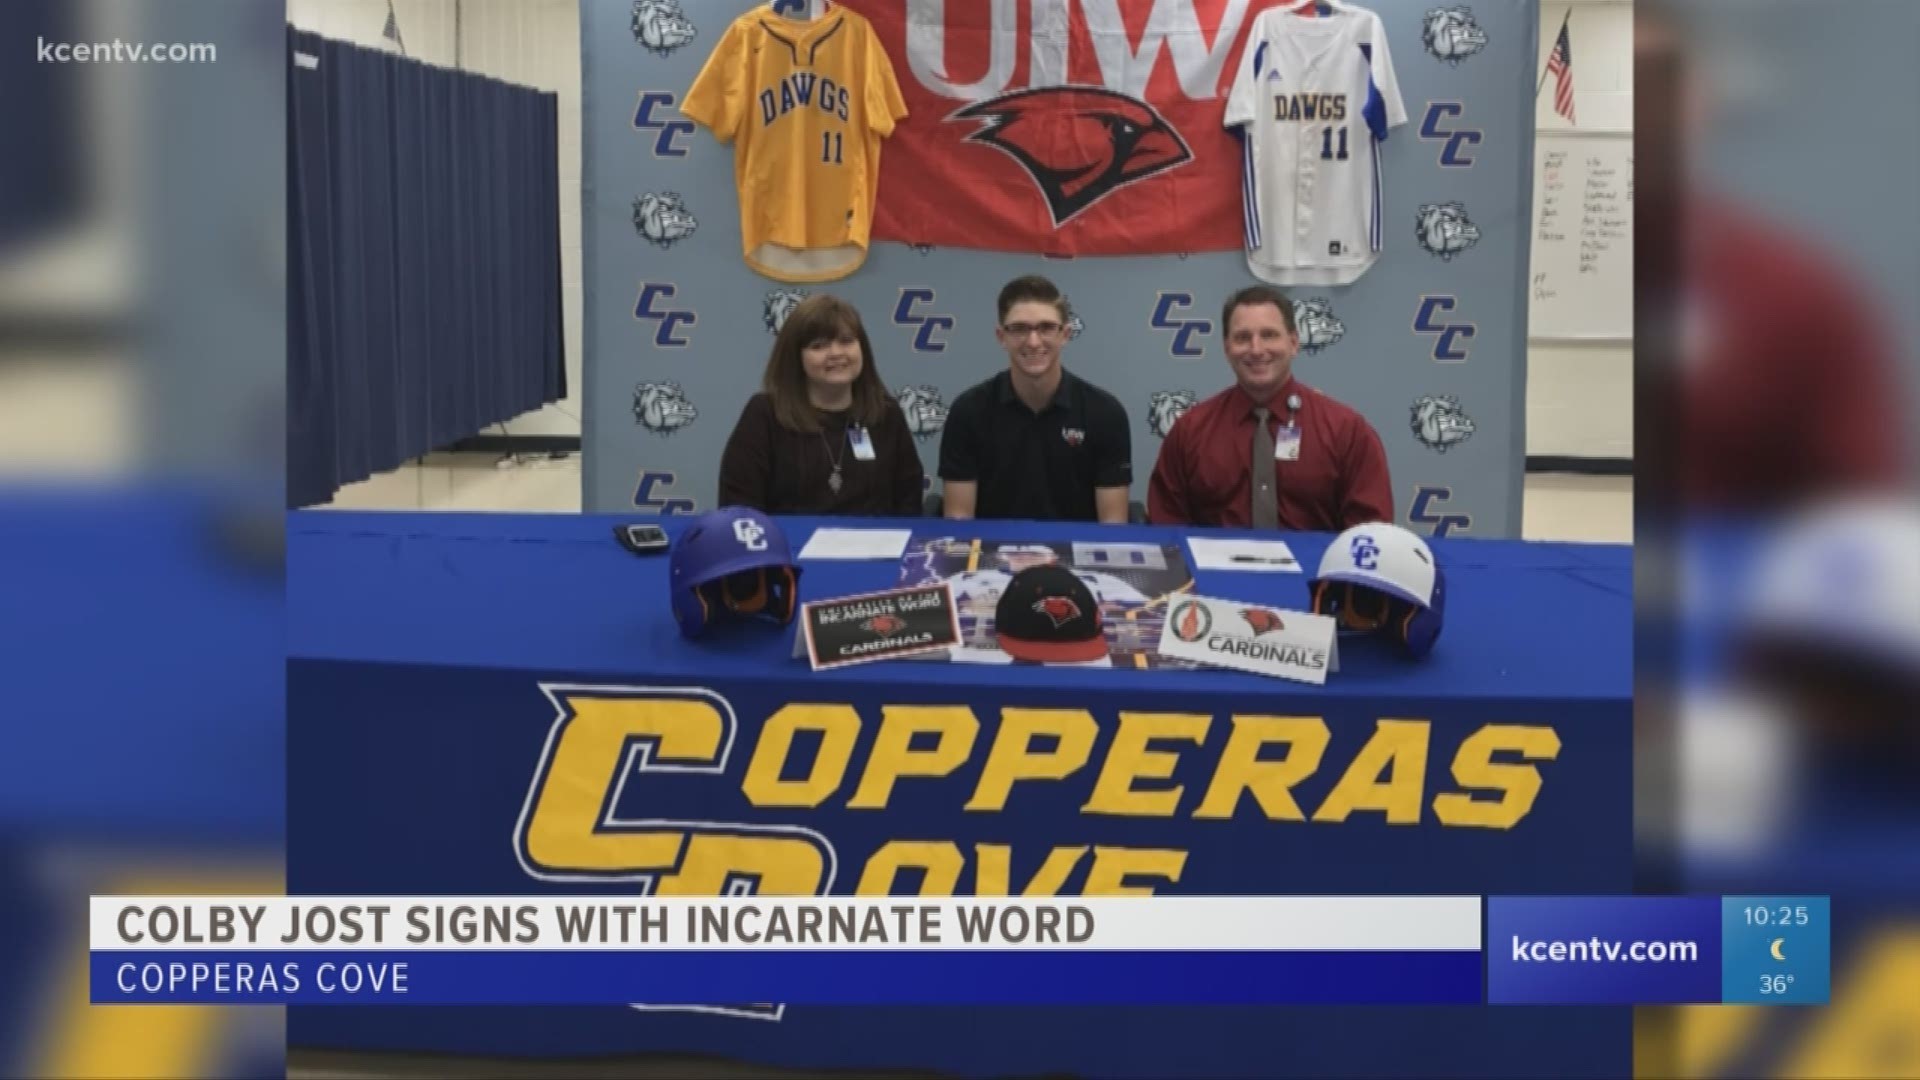 Copperas Cove's Colby Jost signs with Incarnate Word